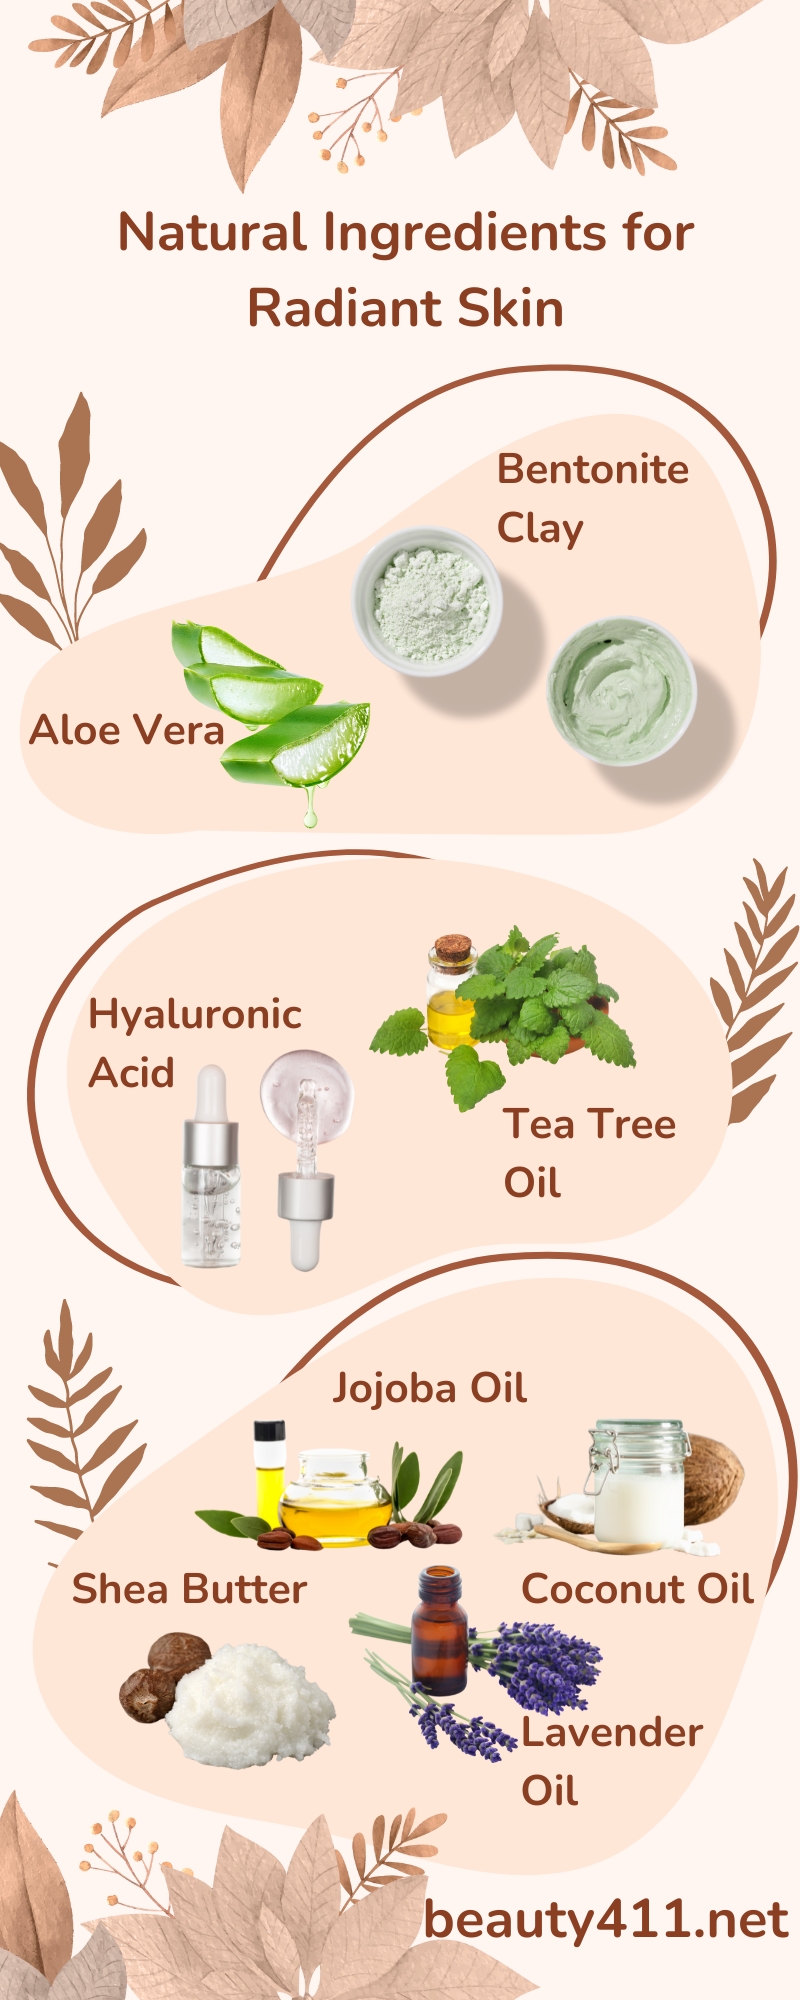 Natural Ingredients for Radiant Skin Infographic